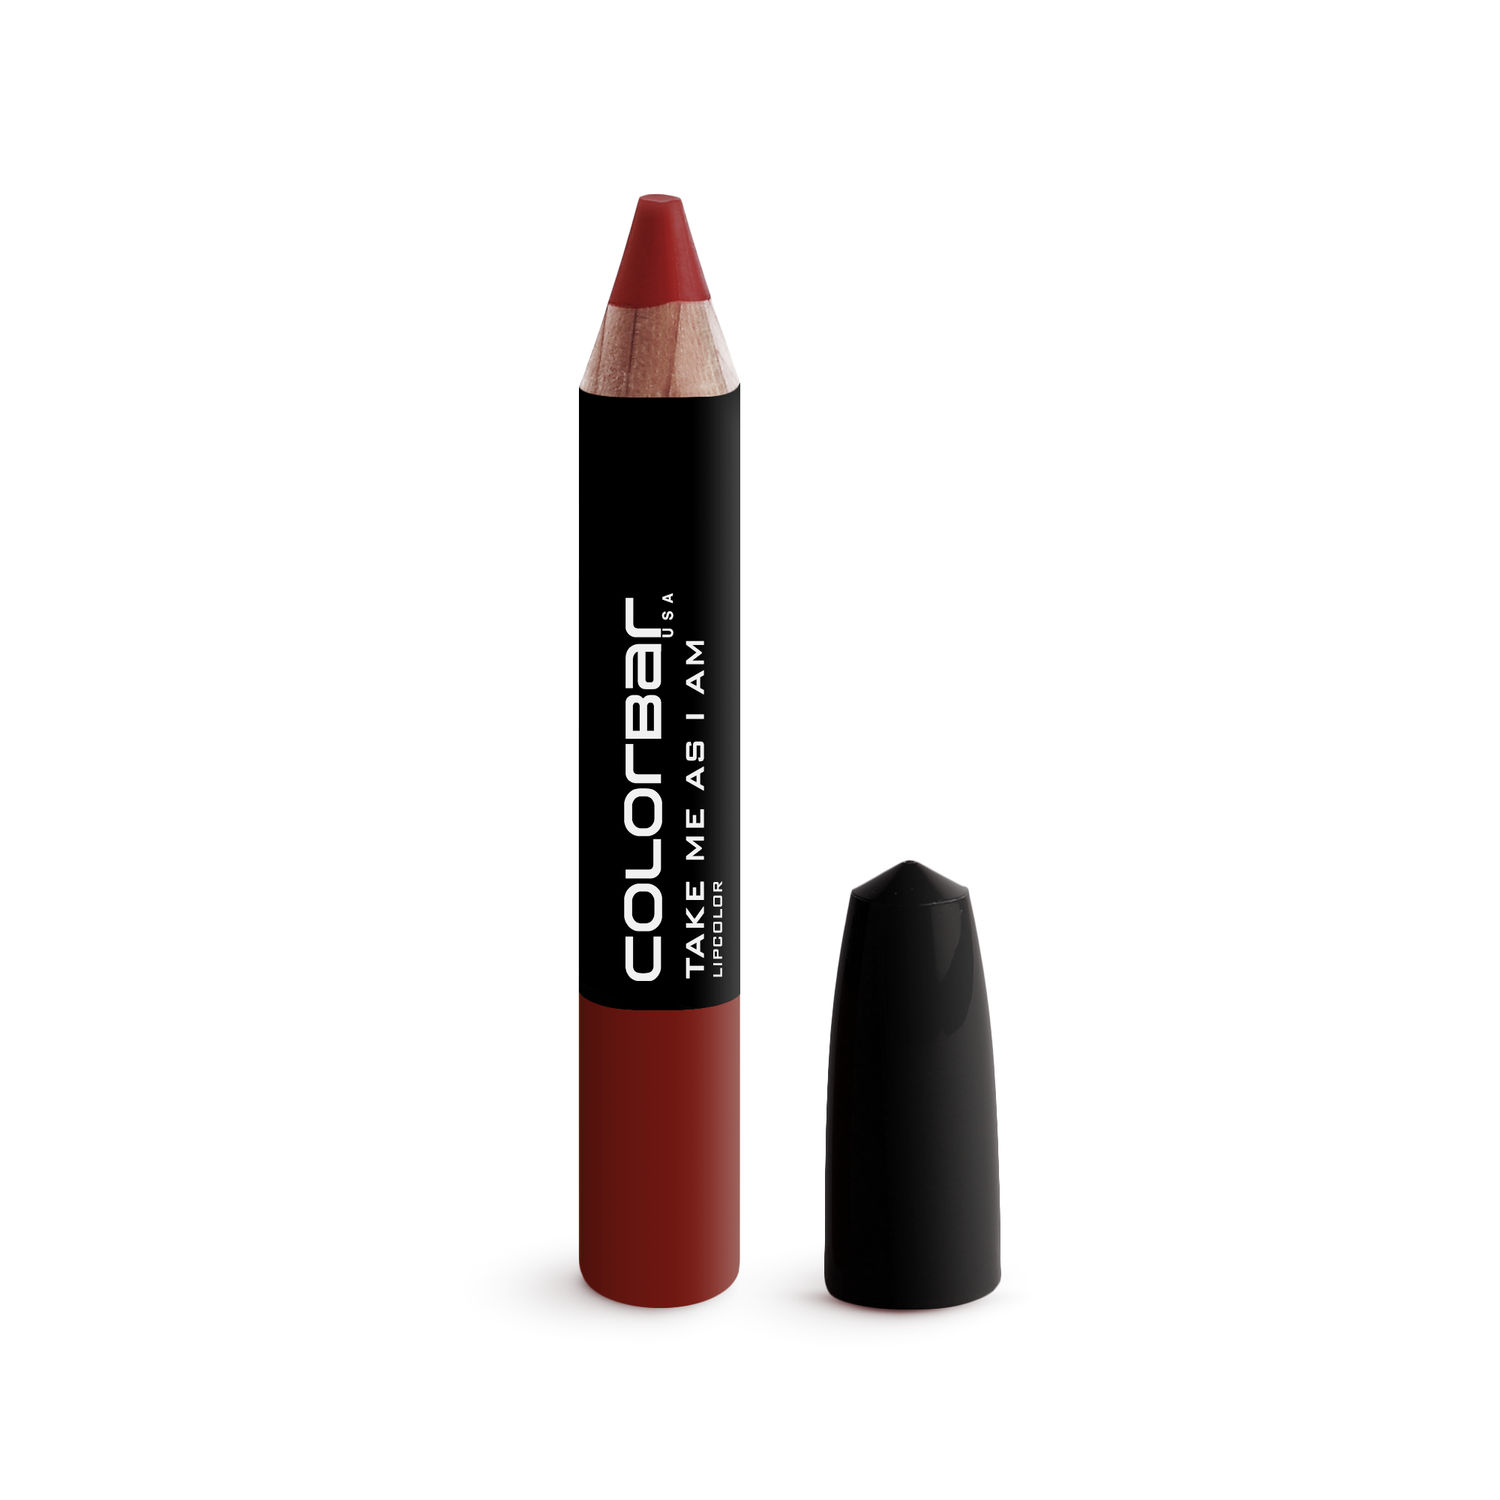 Buy Colorbar Take Me As I Am Lipstick - Dragging Rust 018 With Free Sharpener (3.94 g) - Purplle